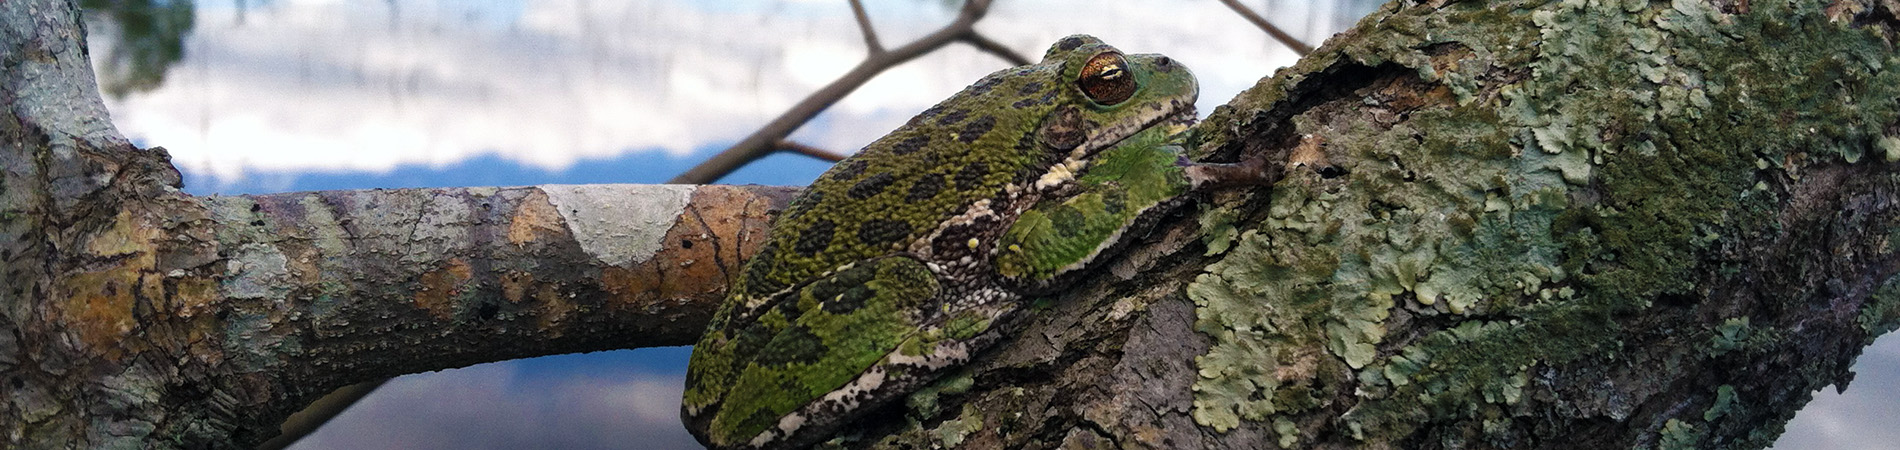 Frog on Branch